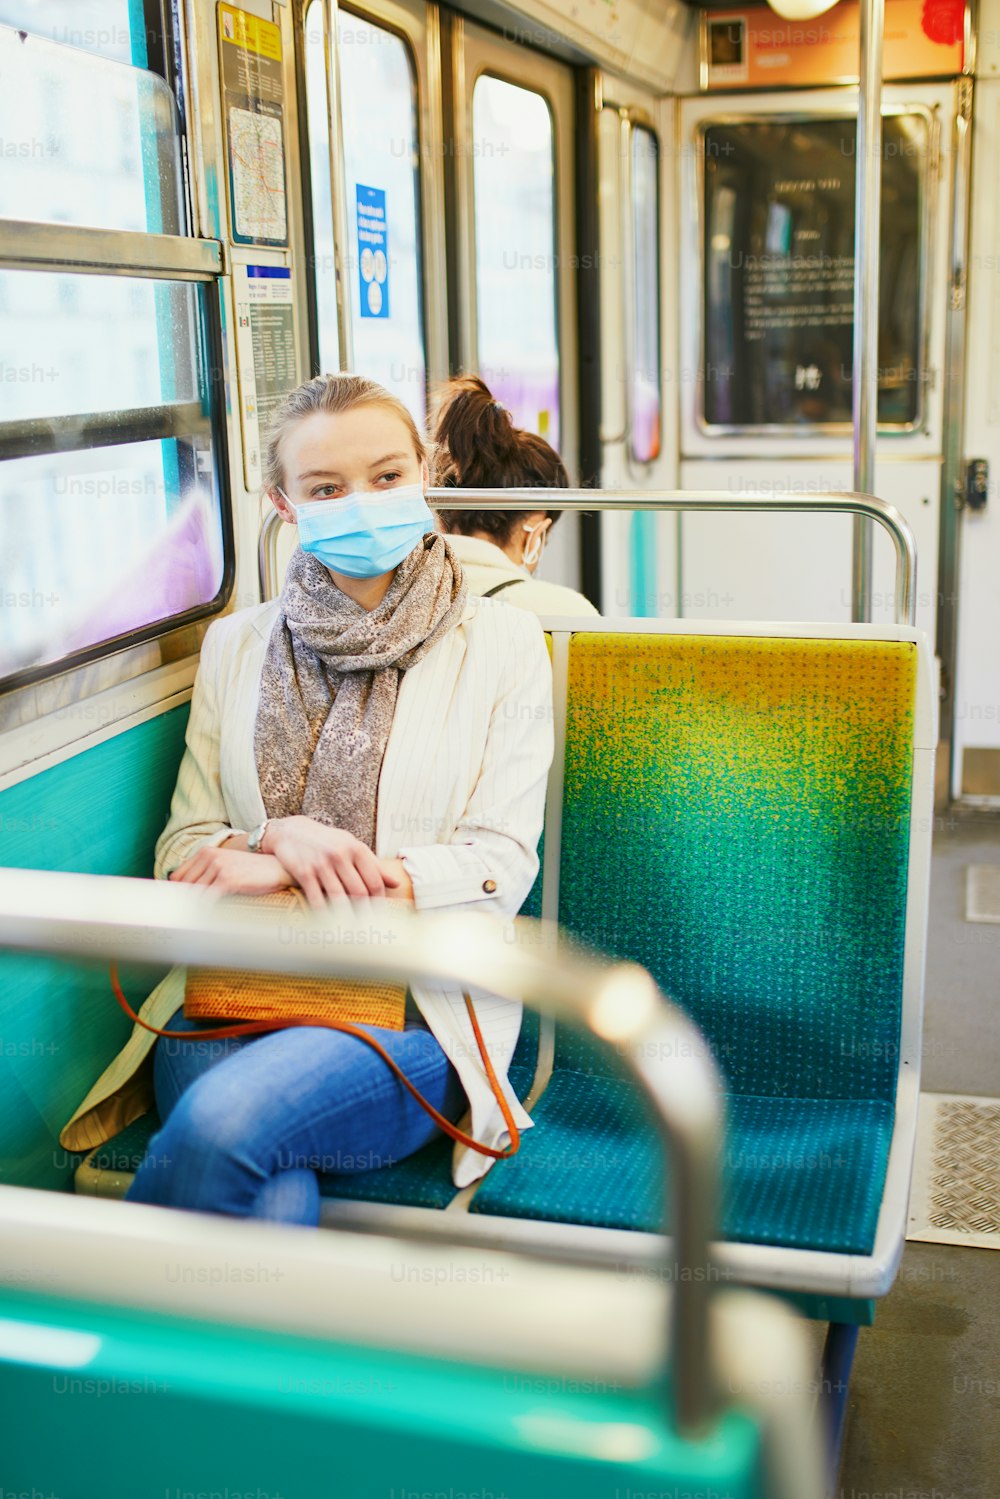 Girl travelling in a train of Parisian underground, wearing protective face mask during coronavirus outbreak. Pandemic and lockdown in France. Tourist spending vacation in France during pandemic